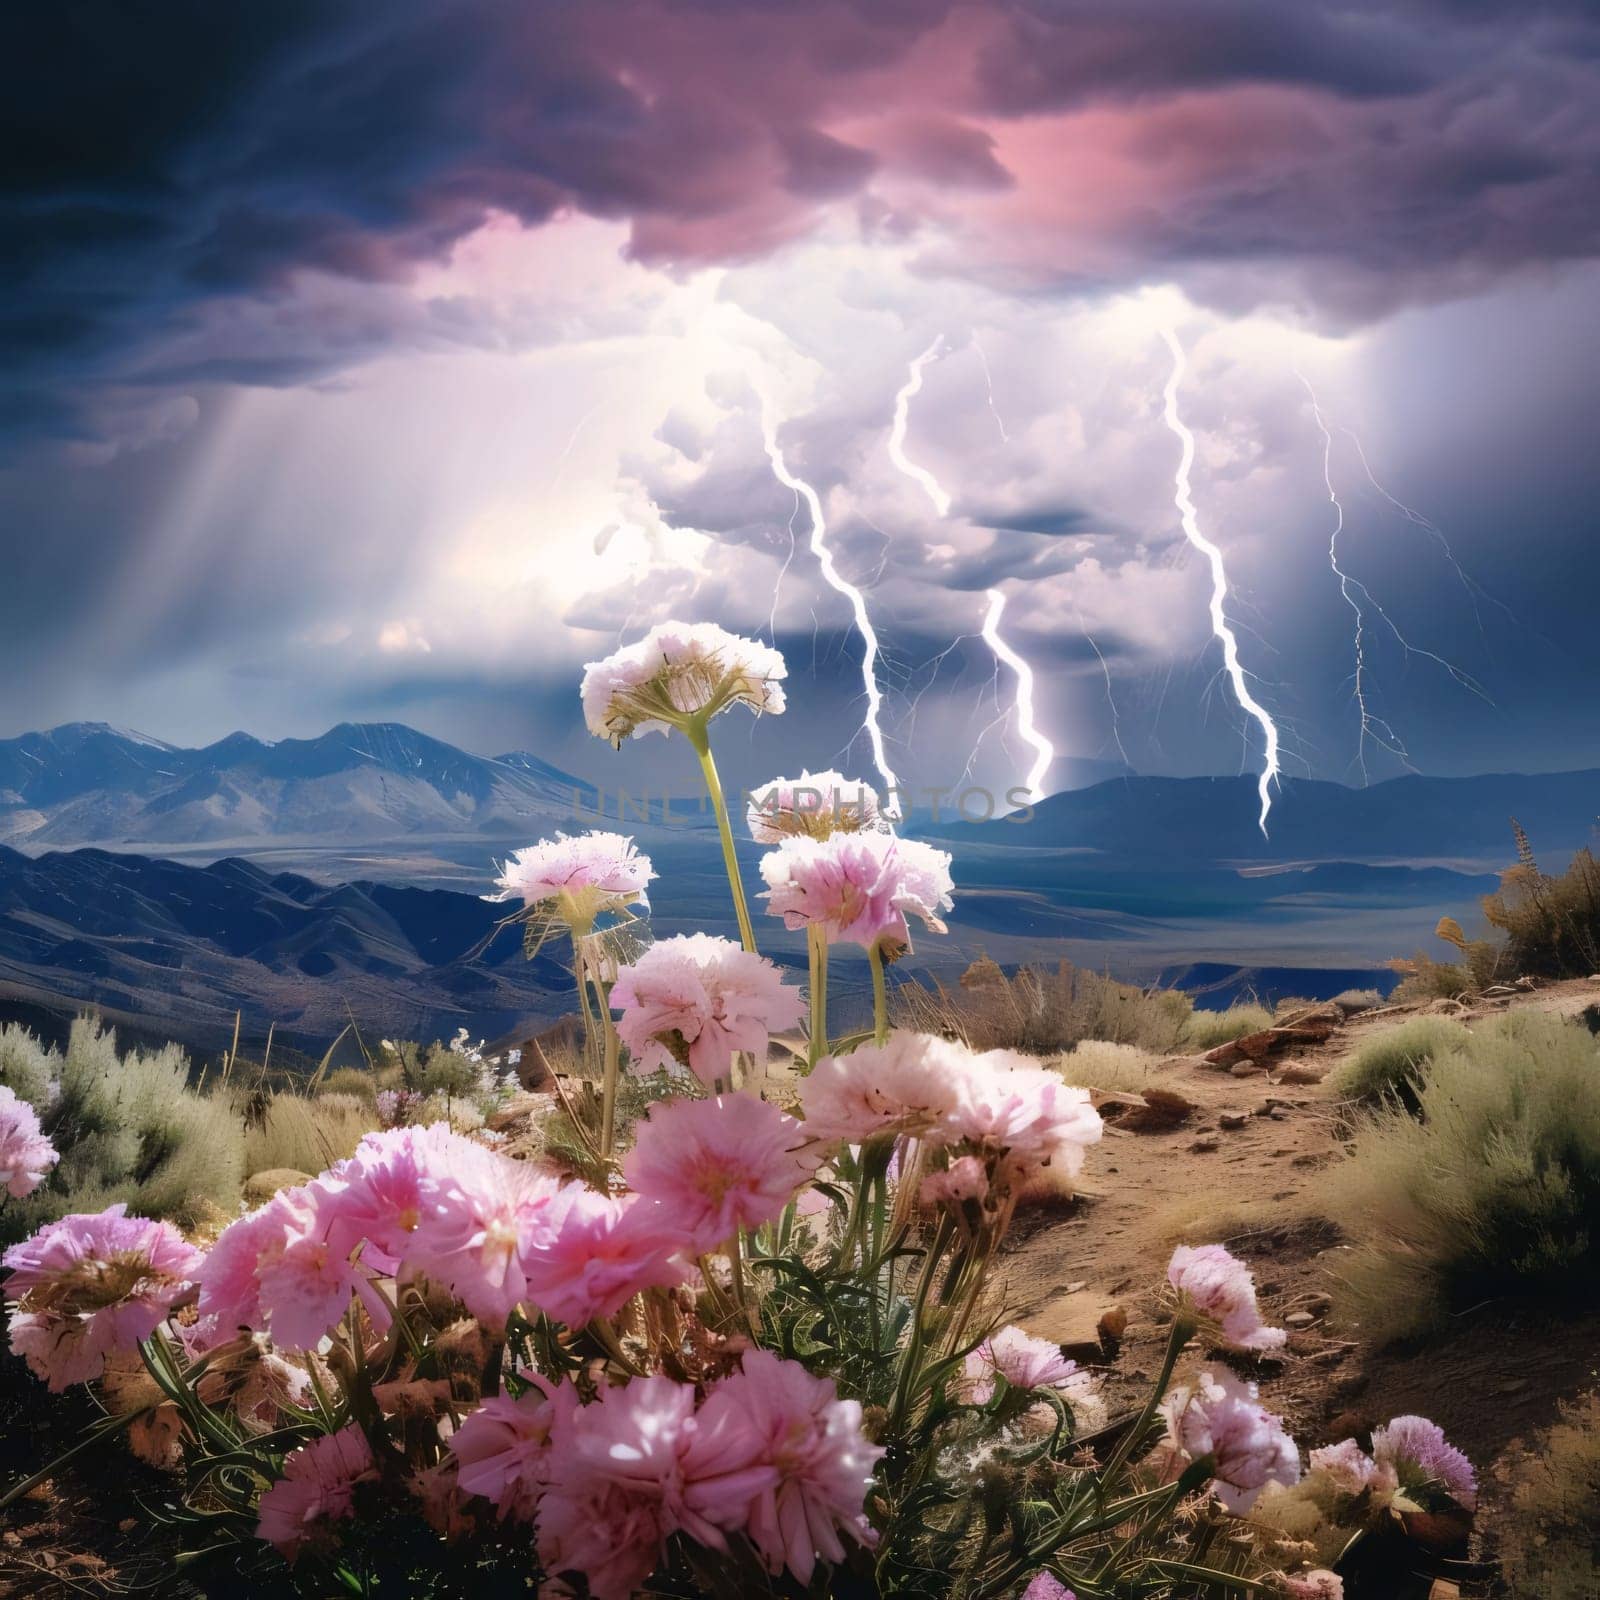 Growing pink flowers on dry mountain sands, high mountains in the distance and lightning clouded skies storm. Flowering flowers, a symbol of spring, new life. by ThemesS